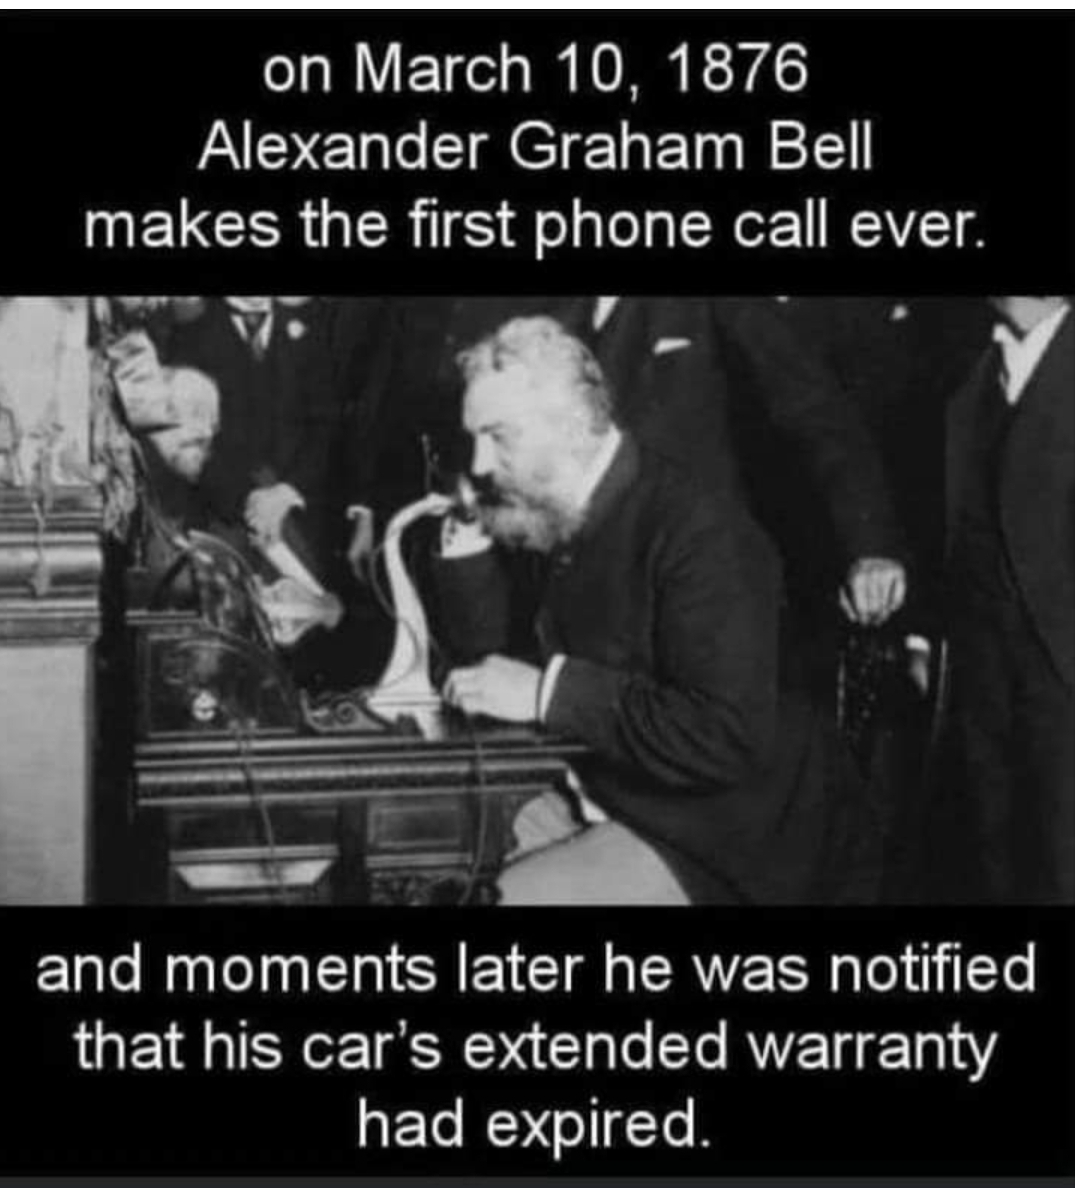 alexander graham bell memes - on Alexander Graham Bell makes the first phone call ever. and moments later he was notified that his car's extended warranty had expired.